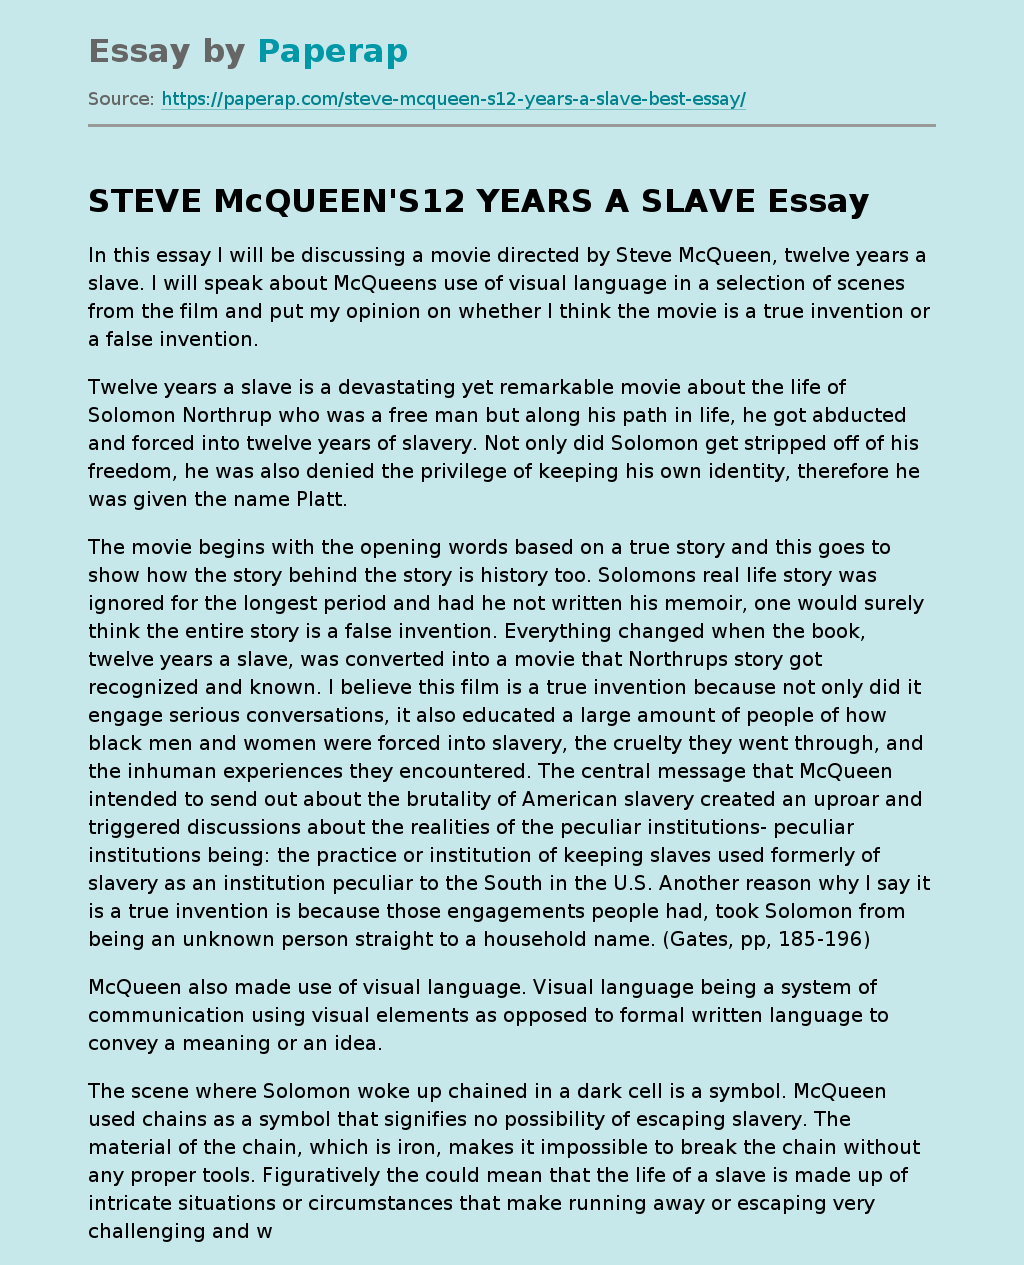 “12 Years a Slave” by Steve Mcqueen